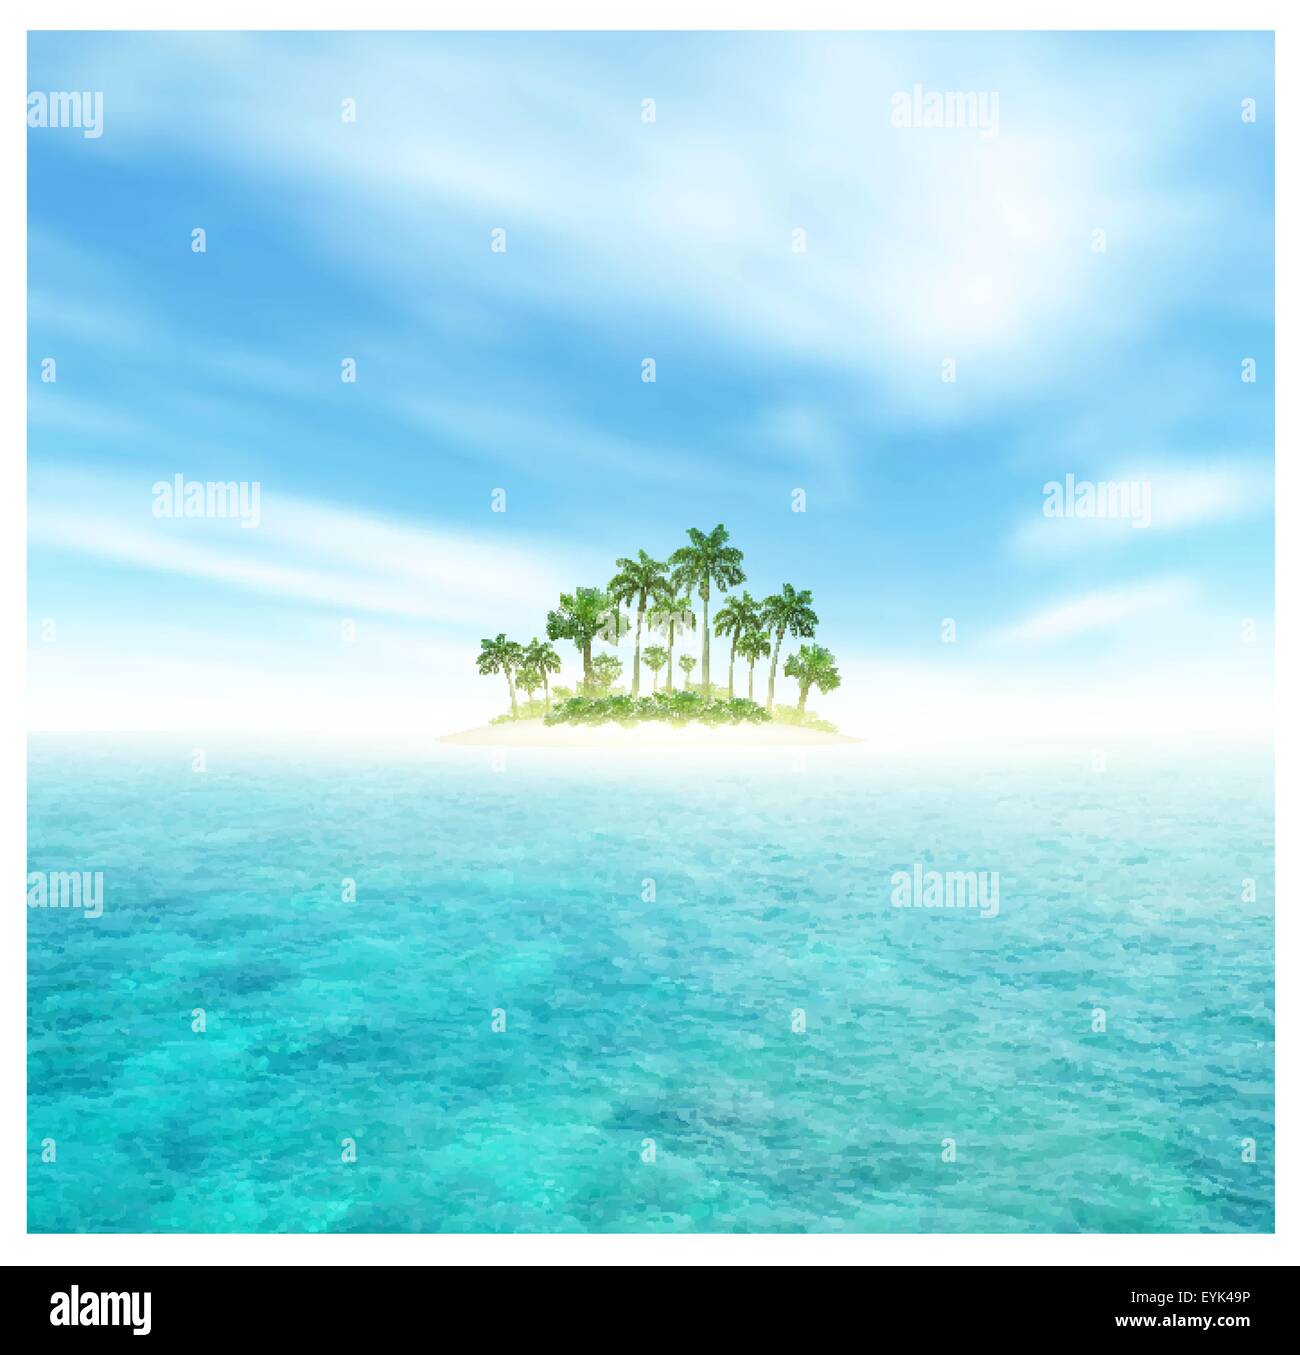 Sky, Ocean And Tropical Island With Palms Stock Vector